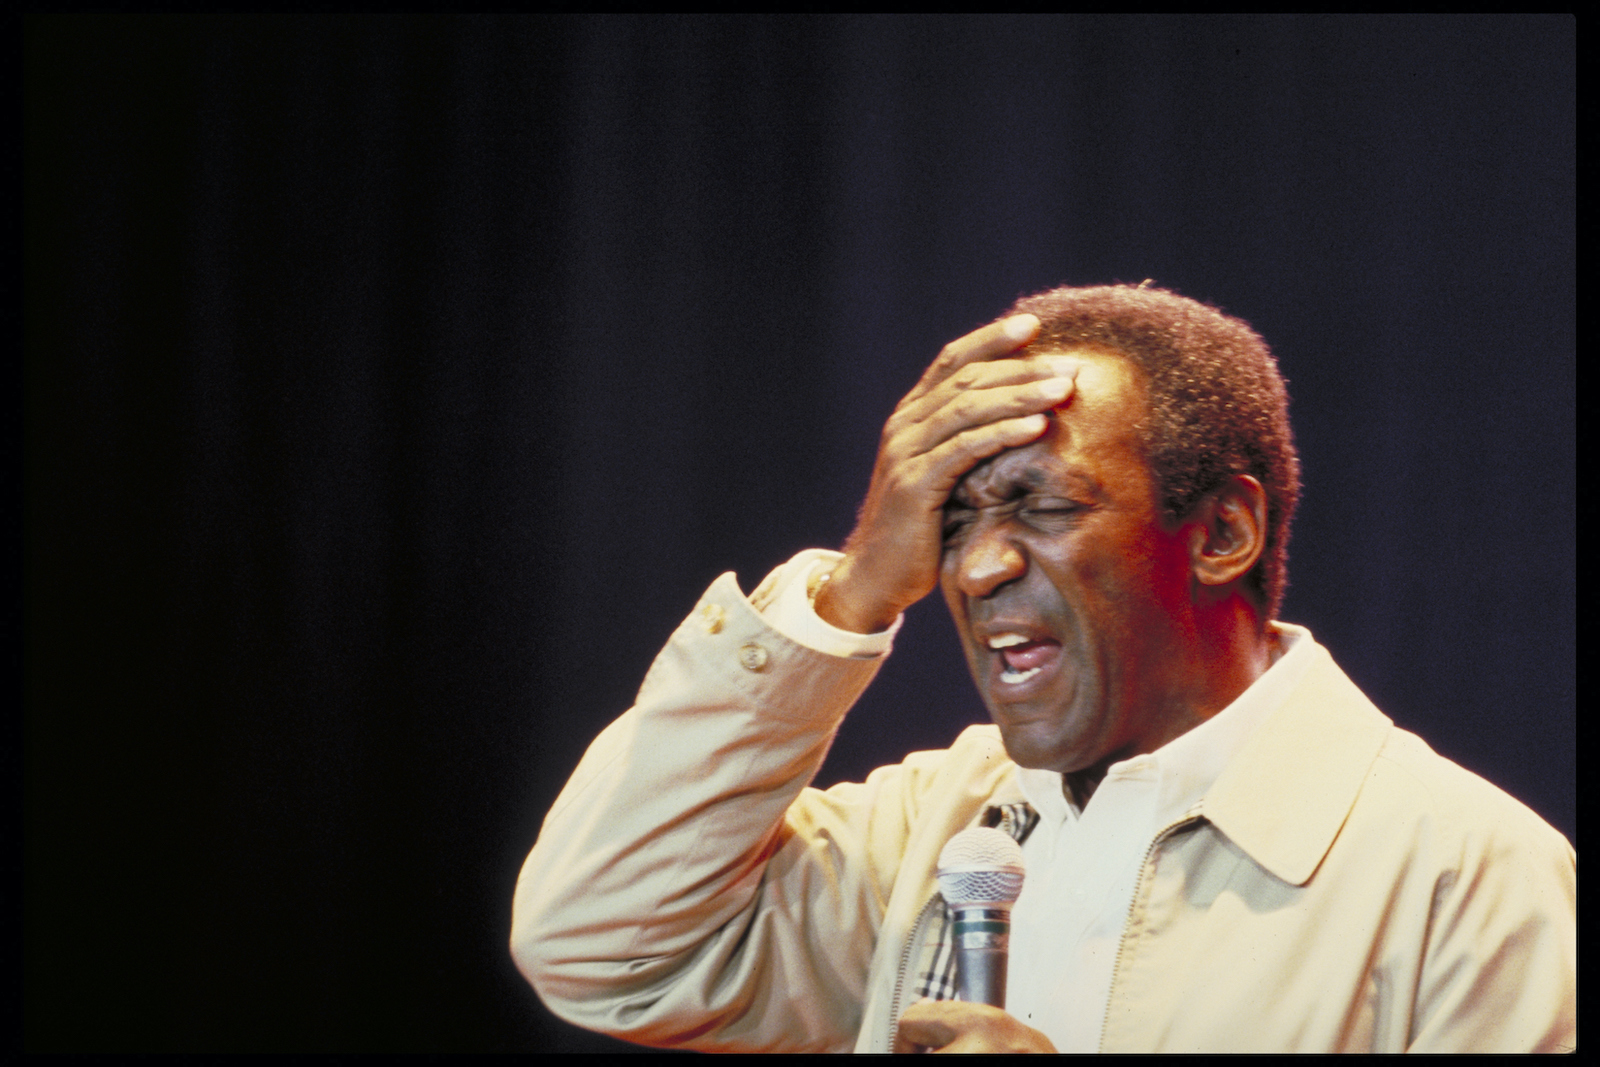 Stand-up comedian Bill Cosby during a performance